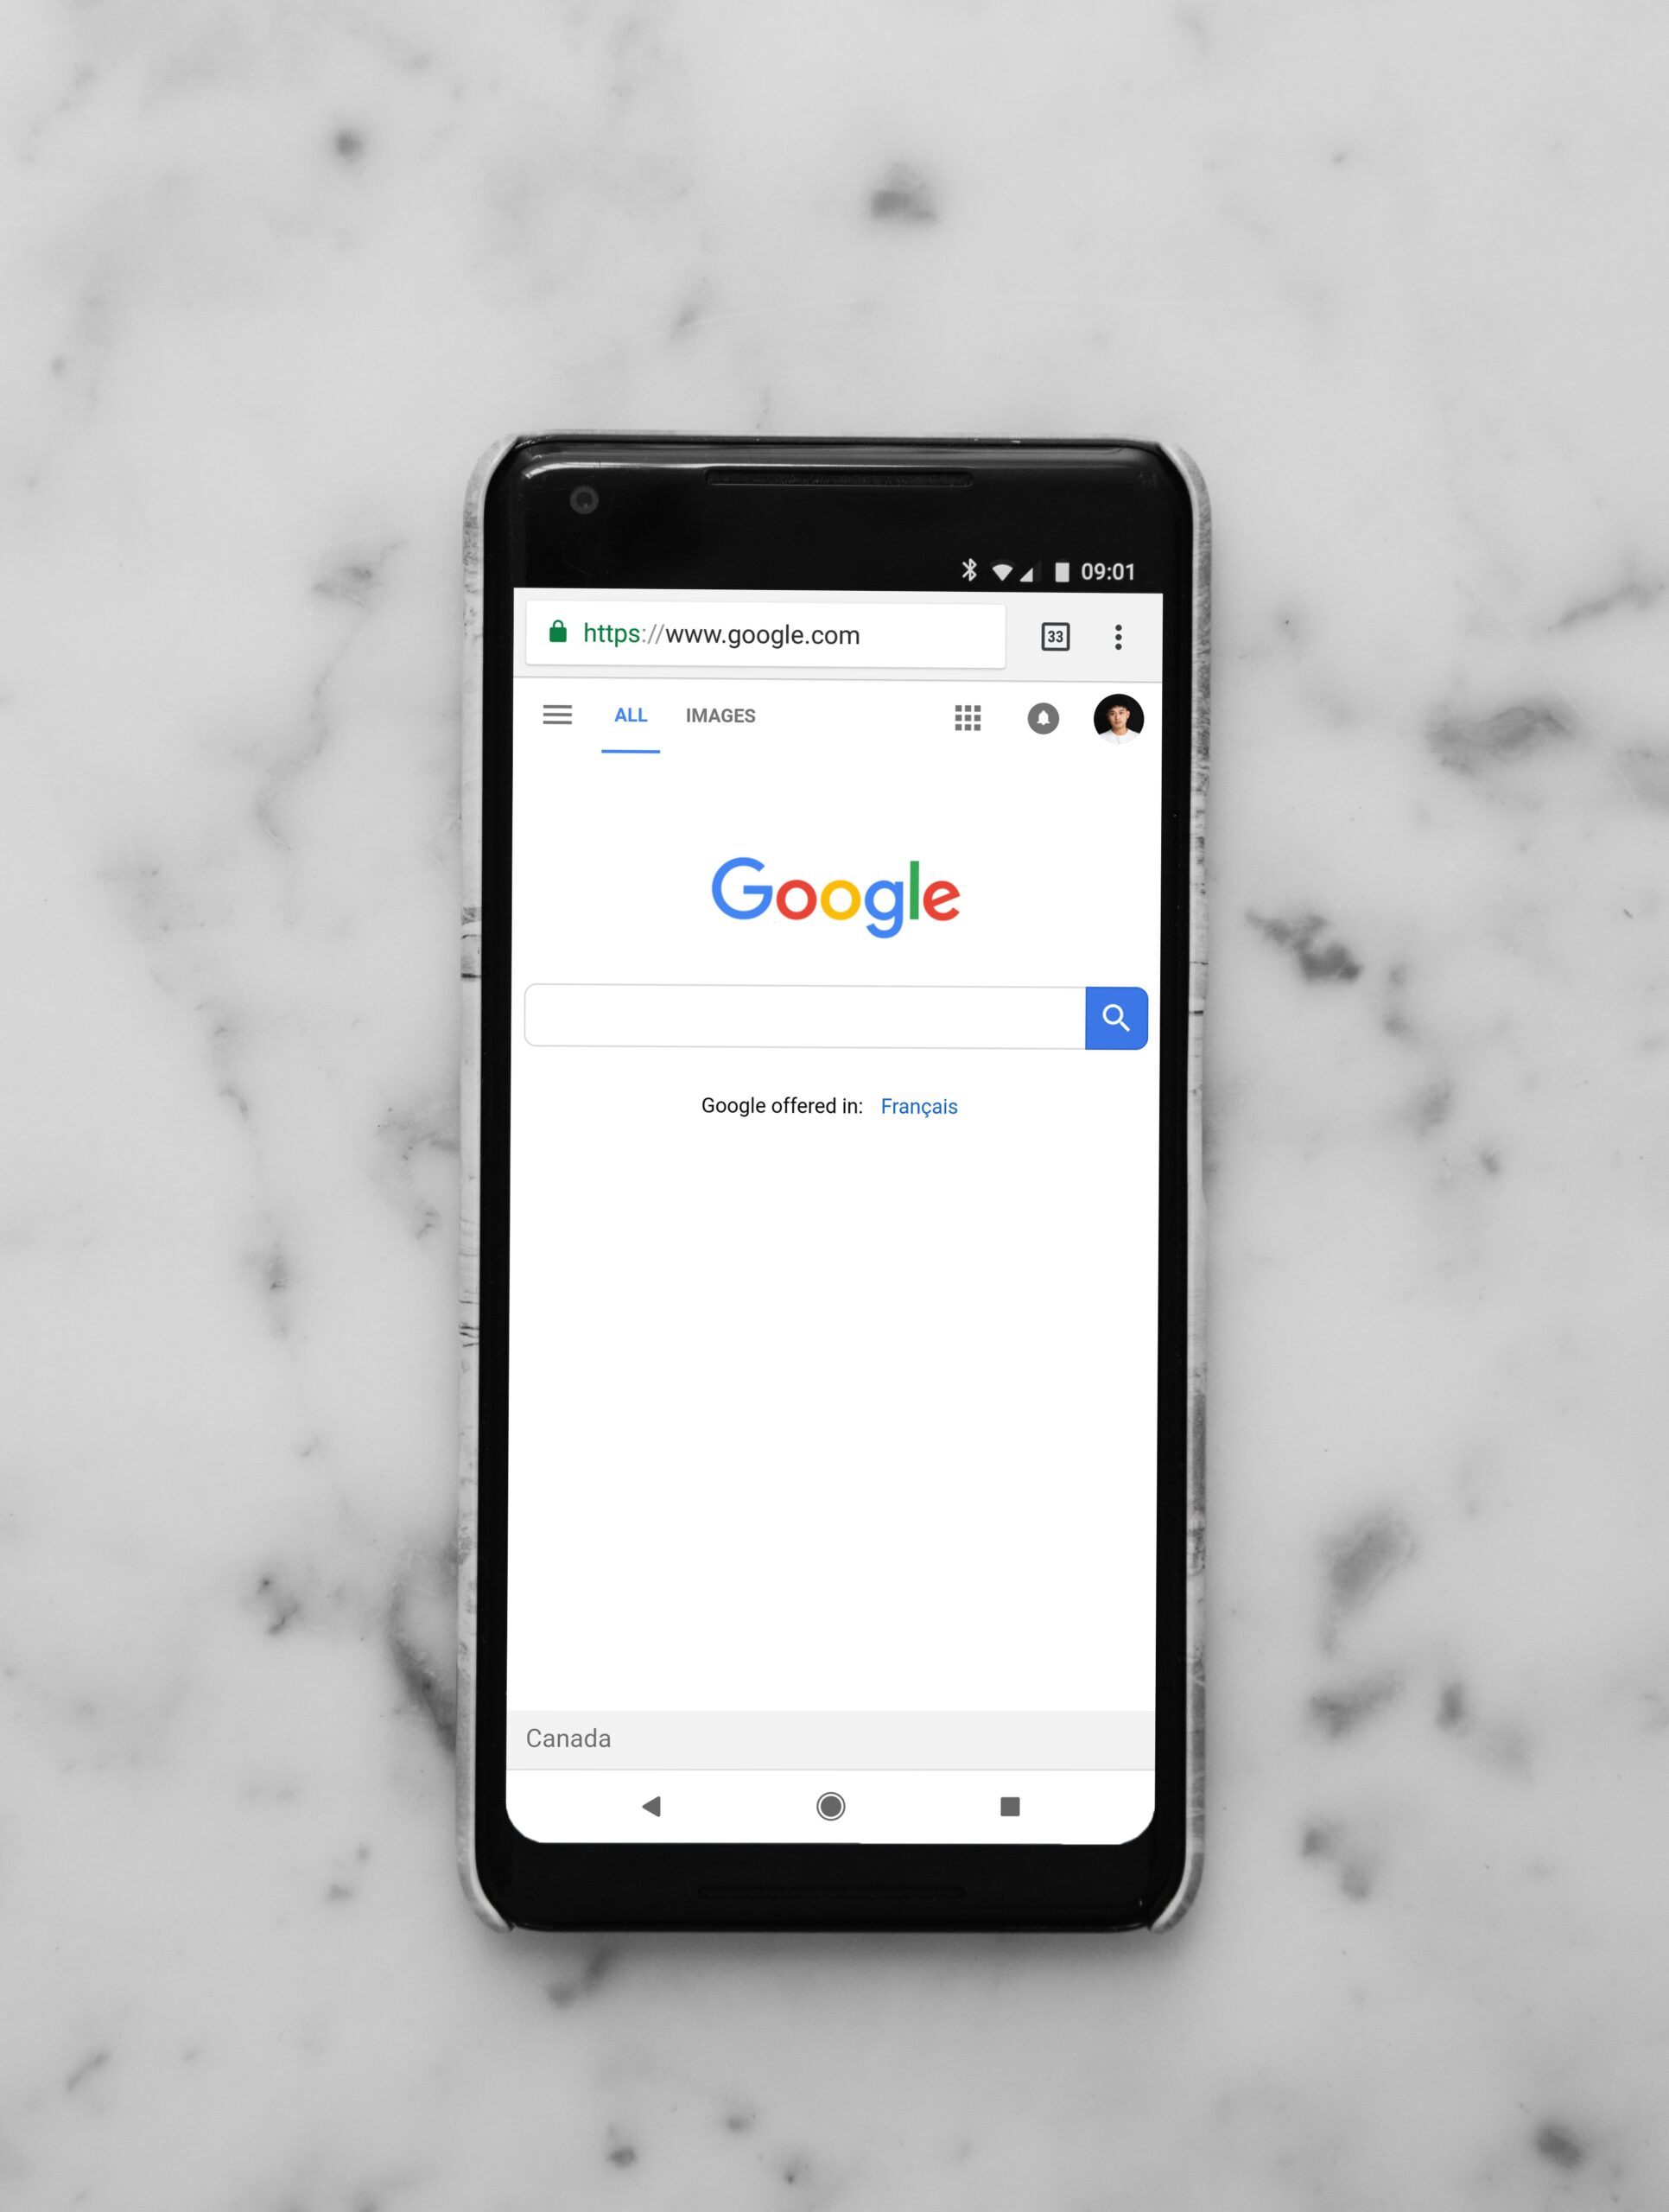 Black Android phone showing Google website